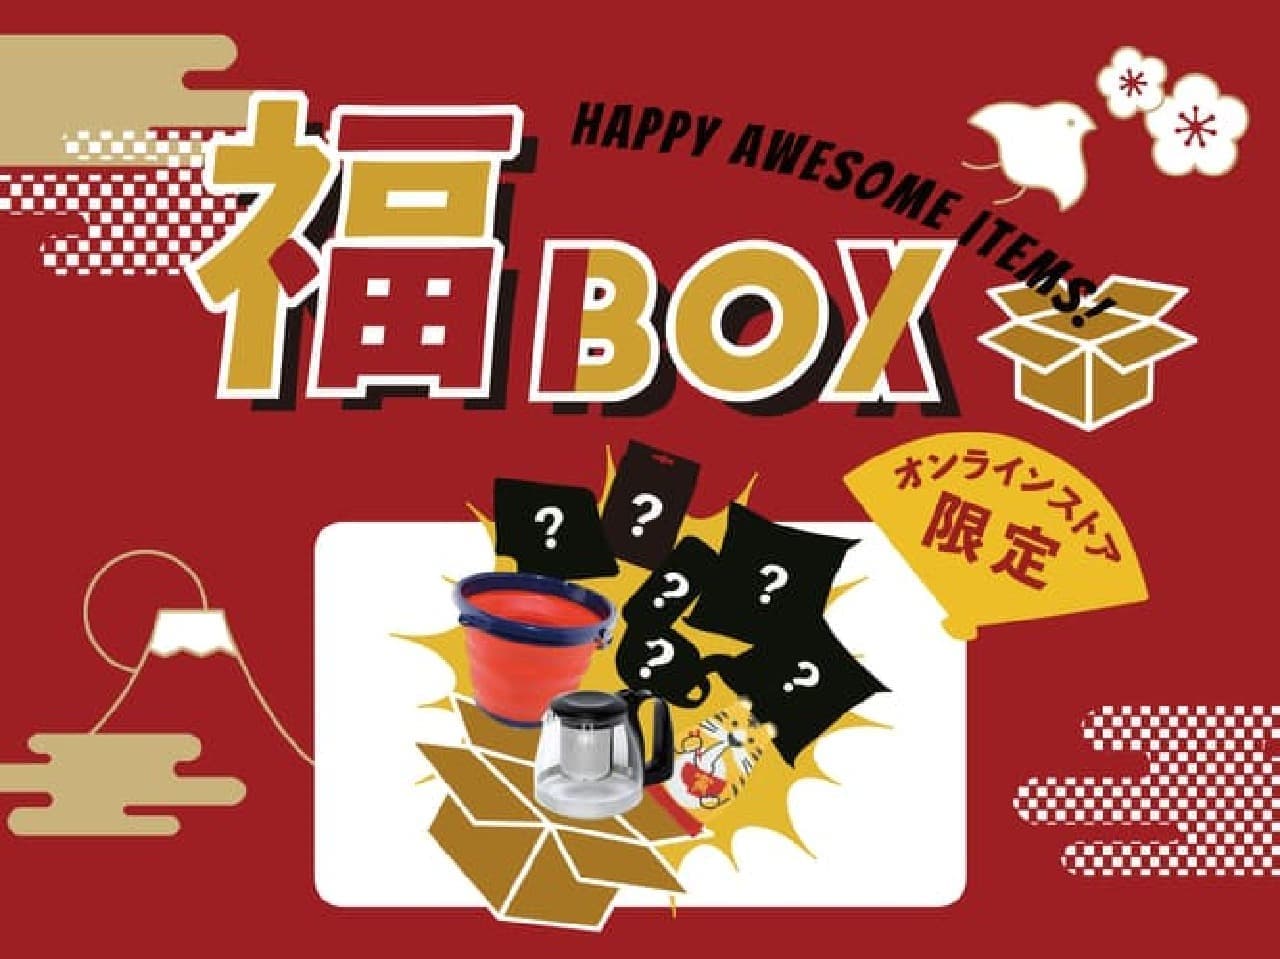 Introducing the Awesome Store "Fuku BOX" --A set of 9 popular items such as kitchen and daily necessities.